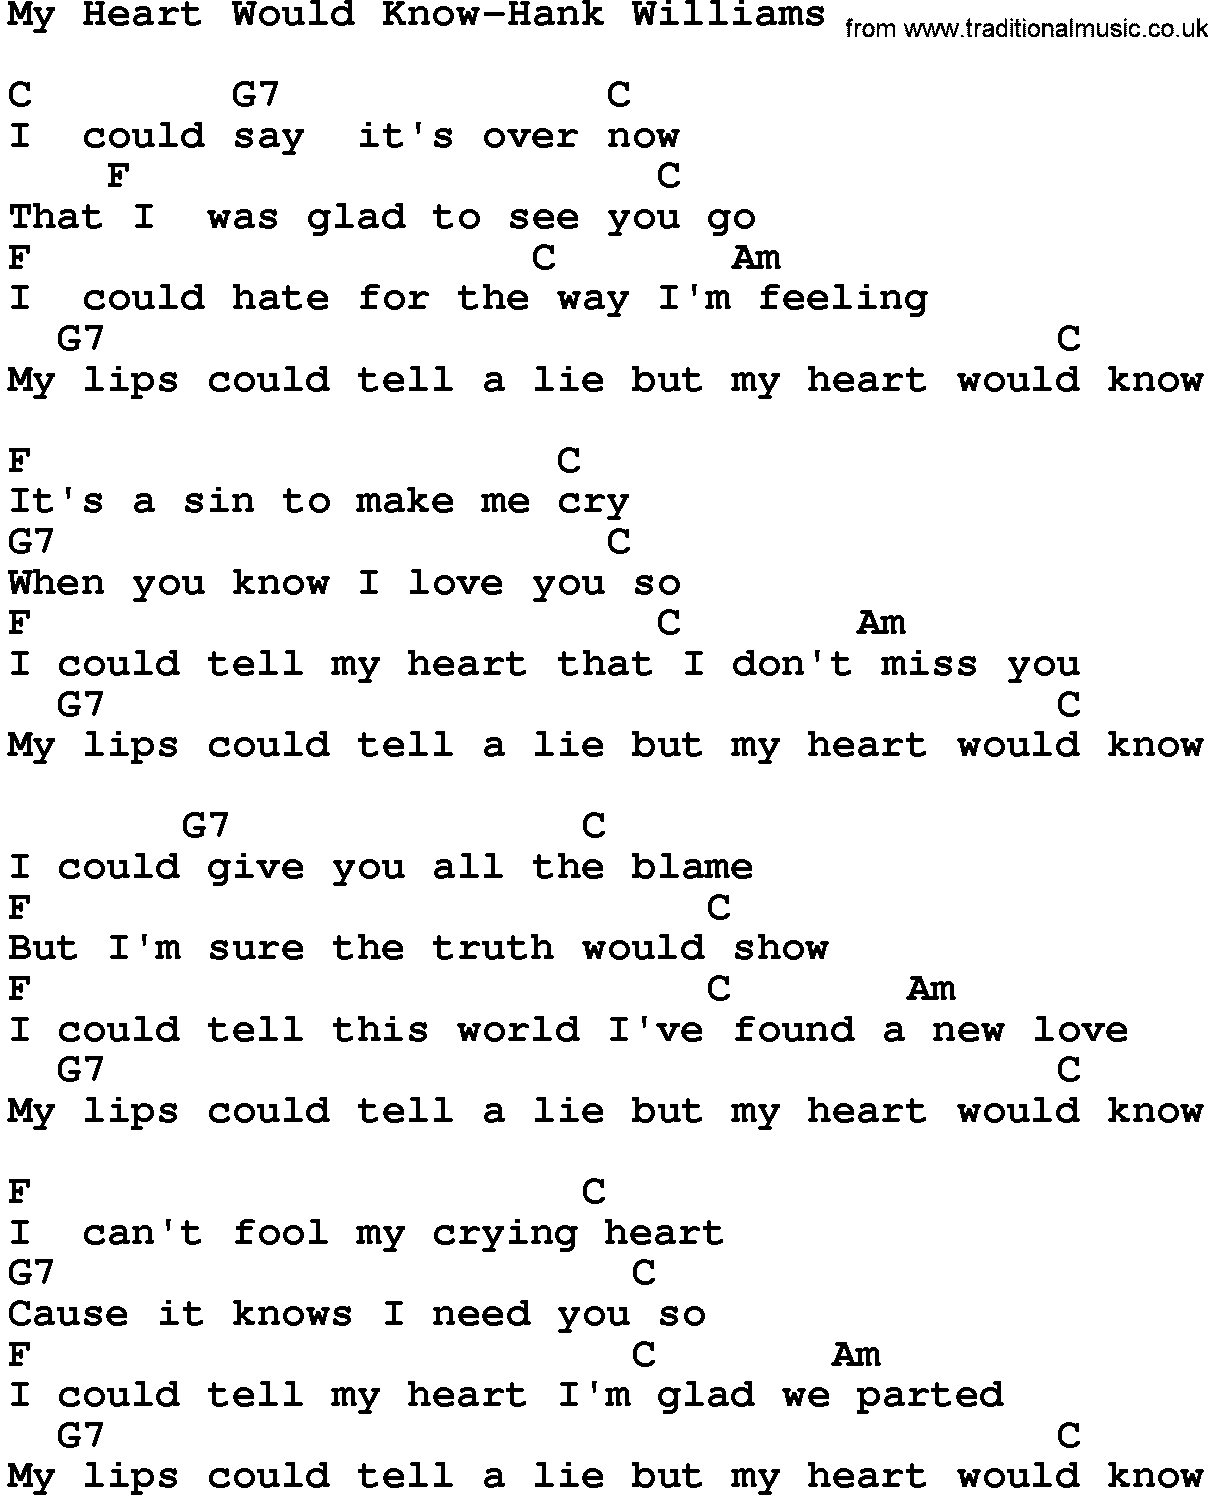 Country music song: My Heart Would Know-Hank Williams lyrics and chords